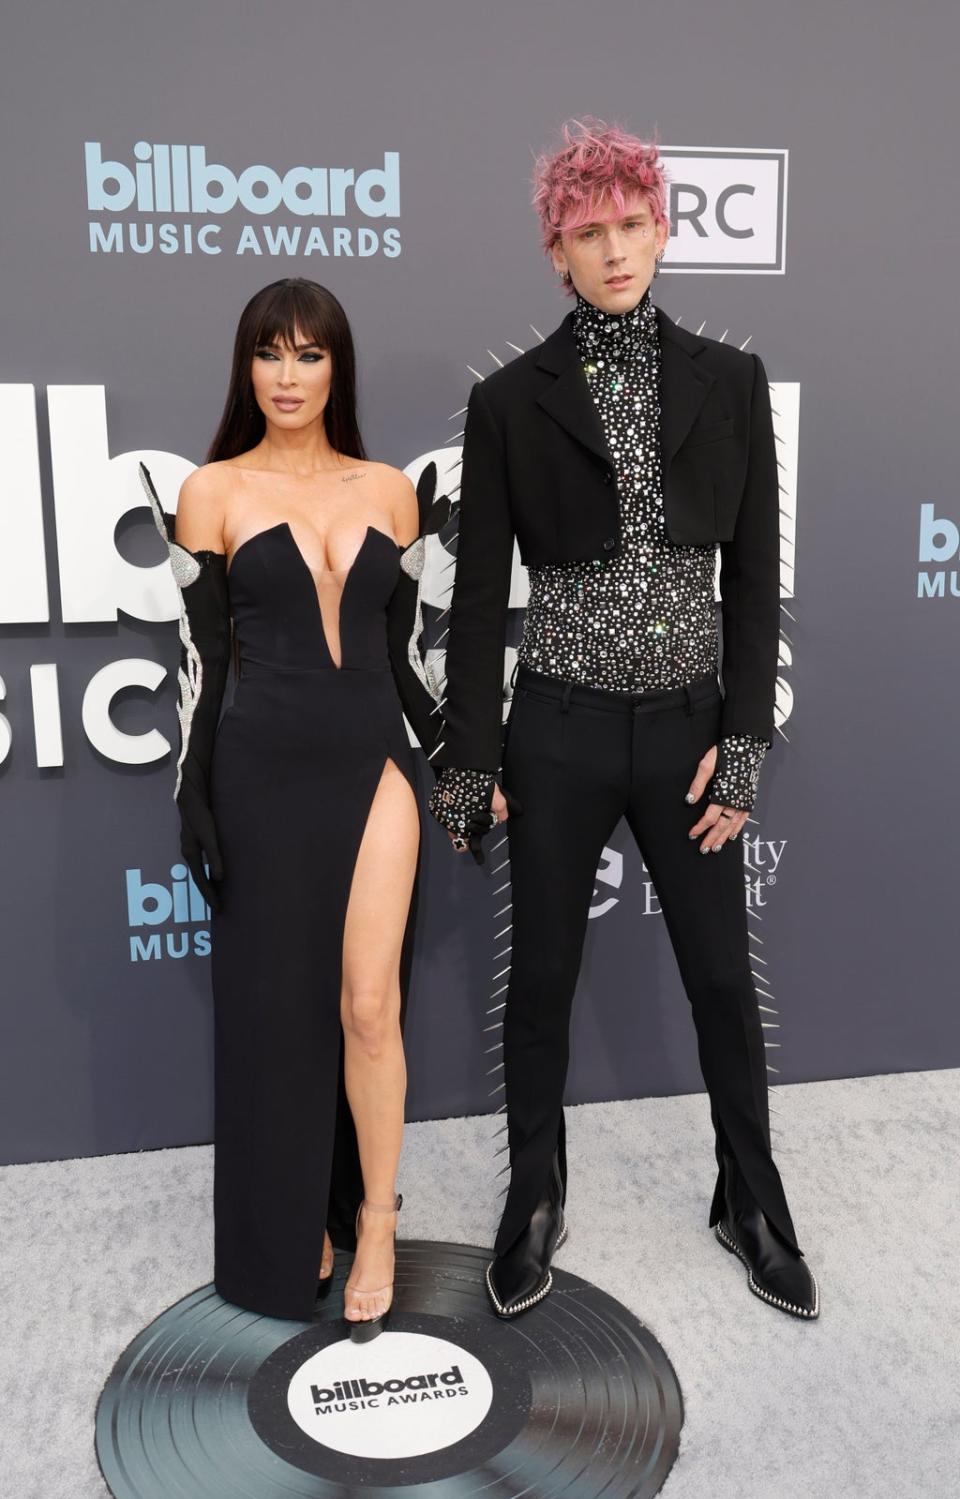 MGK and Megan Fox pose on red carpet at Billboard Music Awards (Getty Images)